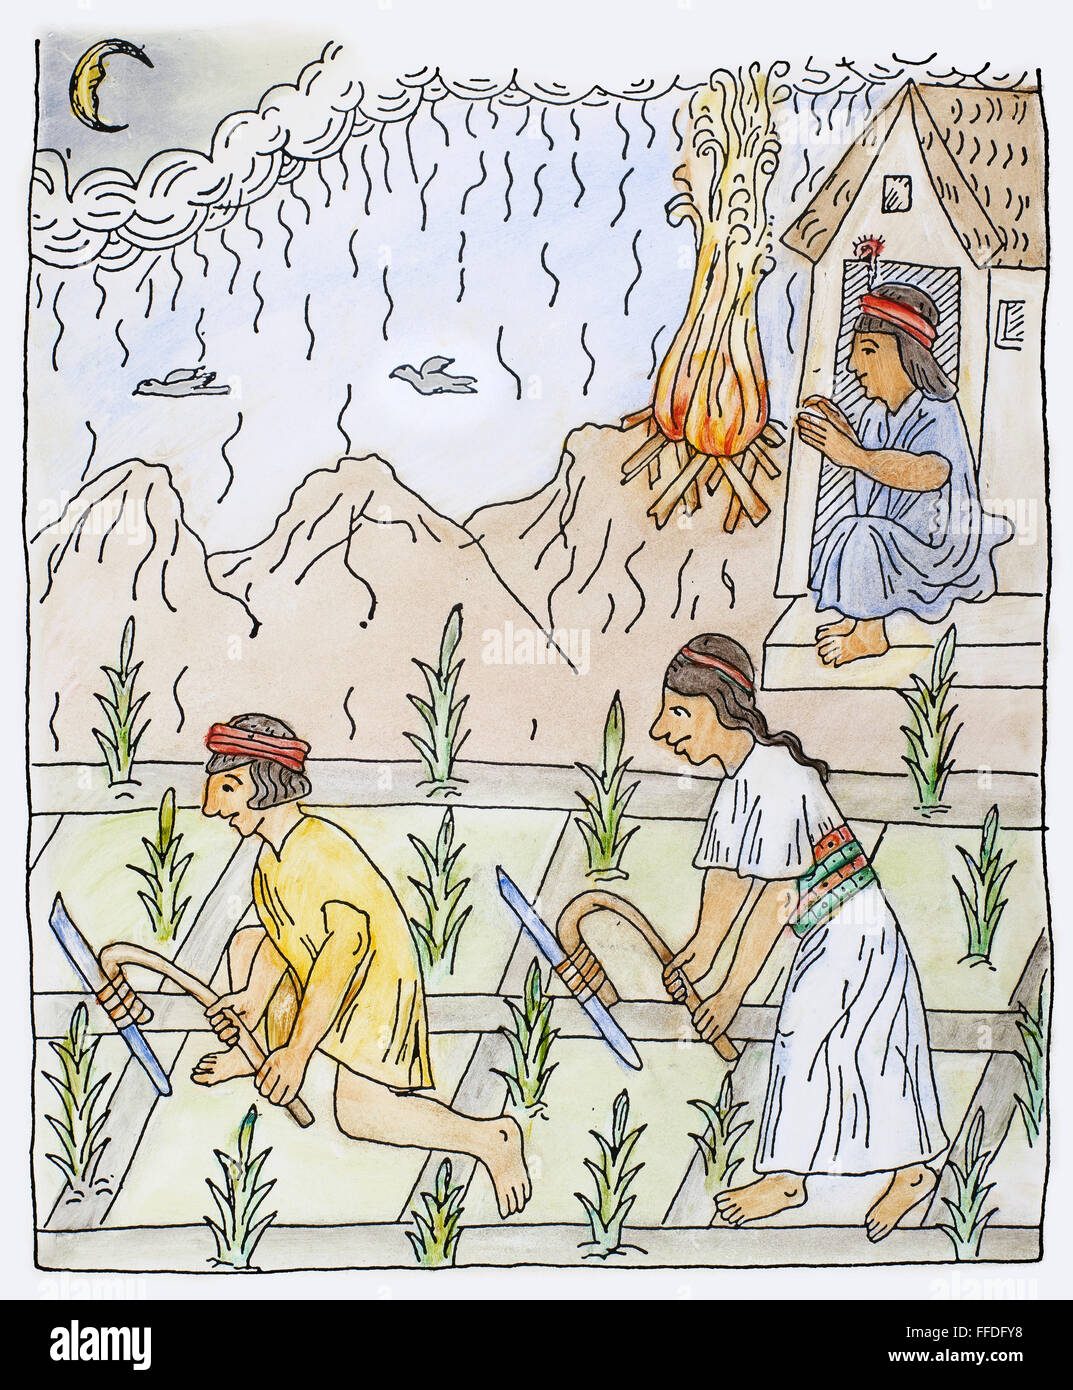 INCAN CULTIVATION. /nIncas cultivating a cornfield. Pen and ink drawing from 'El primer nueva cronica y buen gobierno' ('The first new chronicle and good government'), 1583-1615, by Felipe Guaman Poma de Ayala. Stock Photo